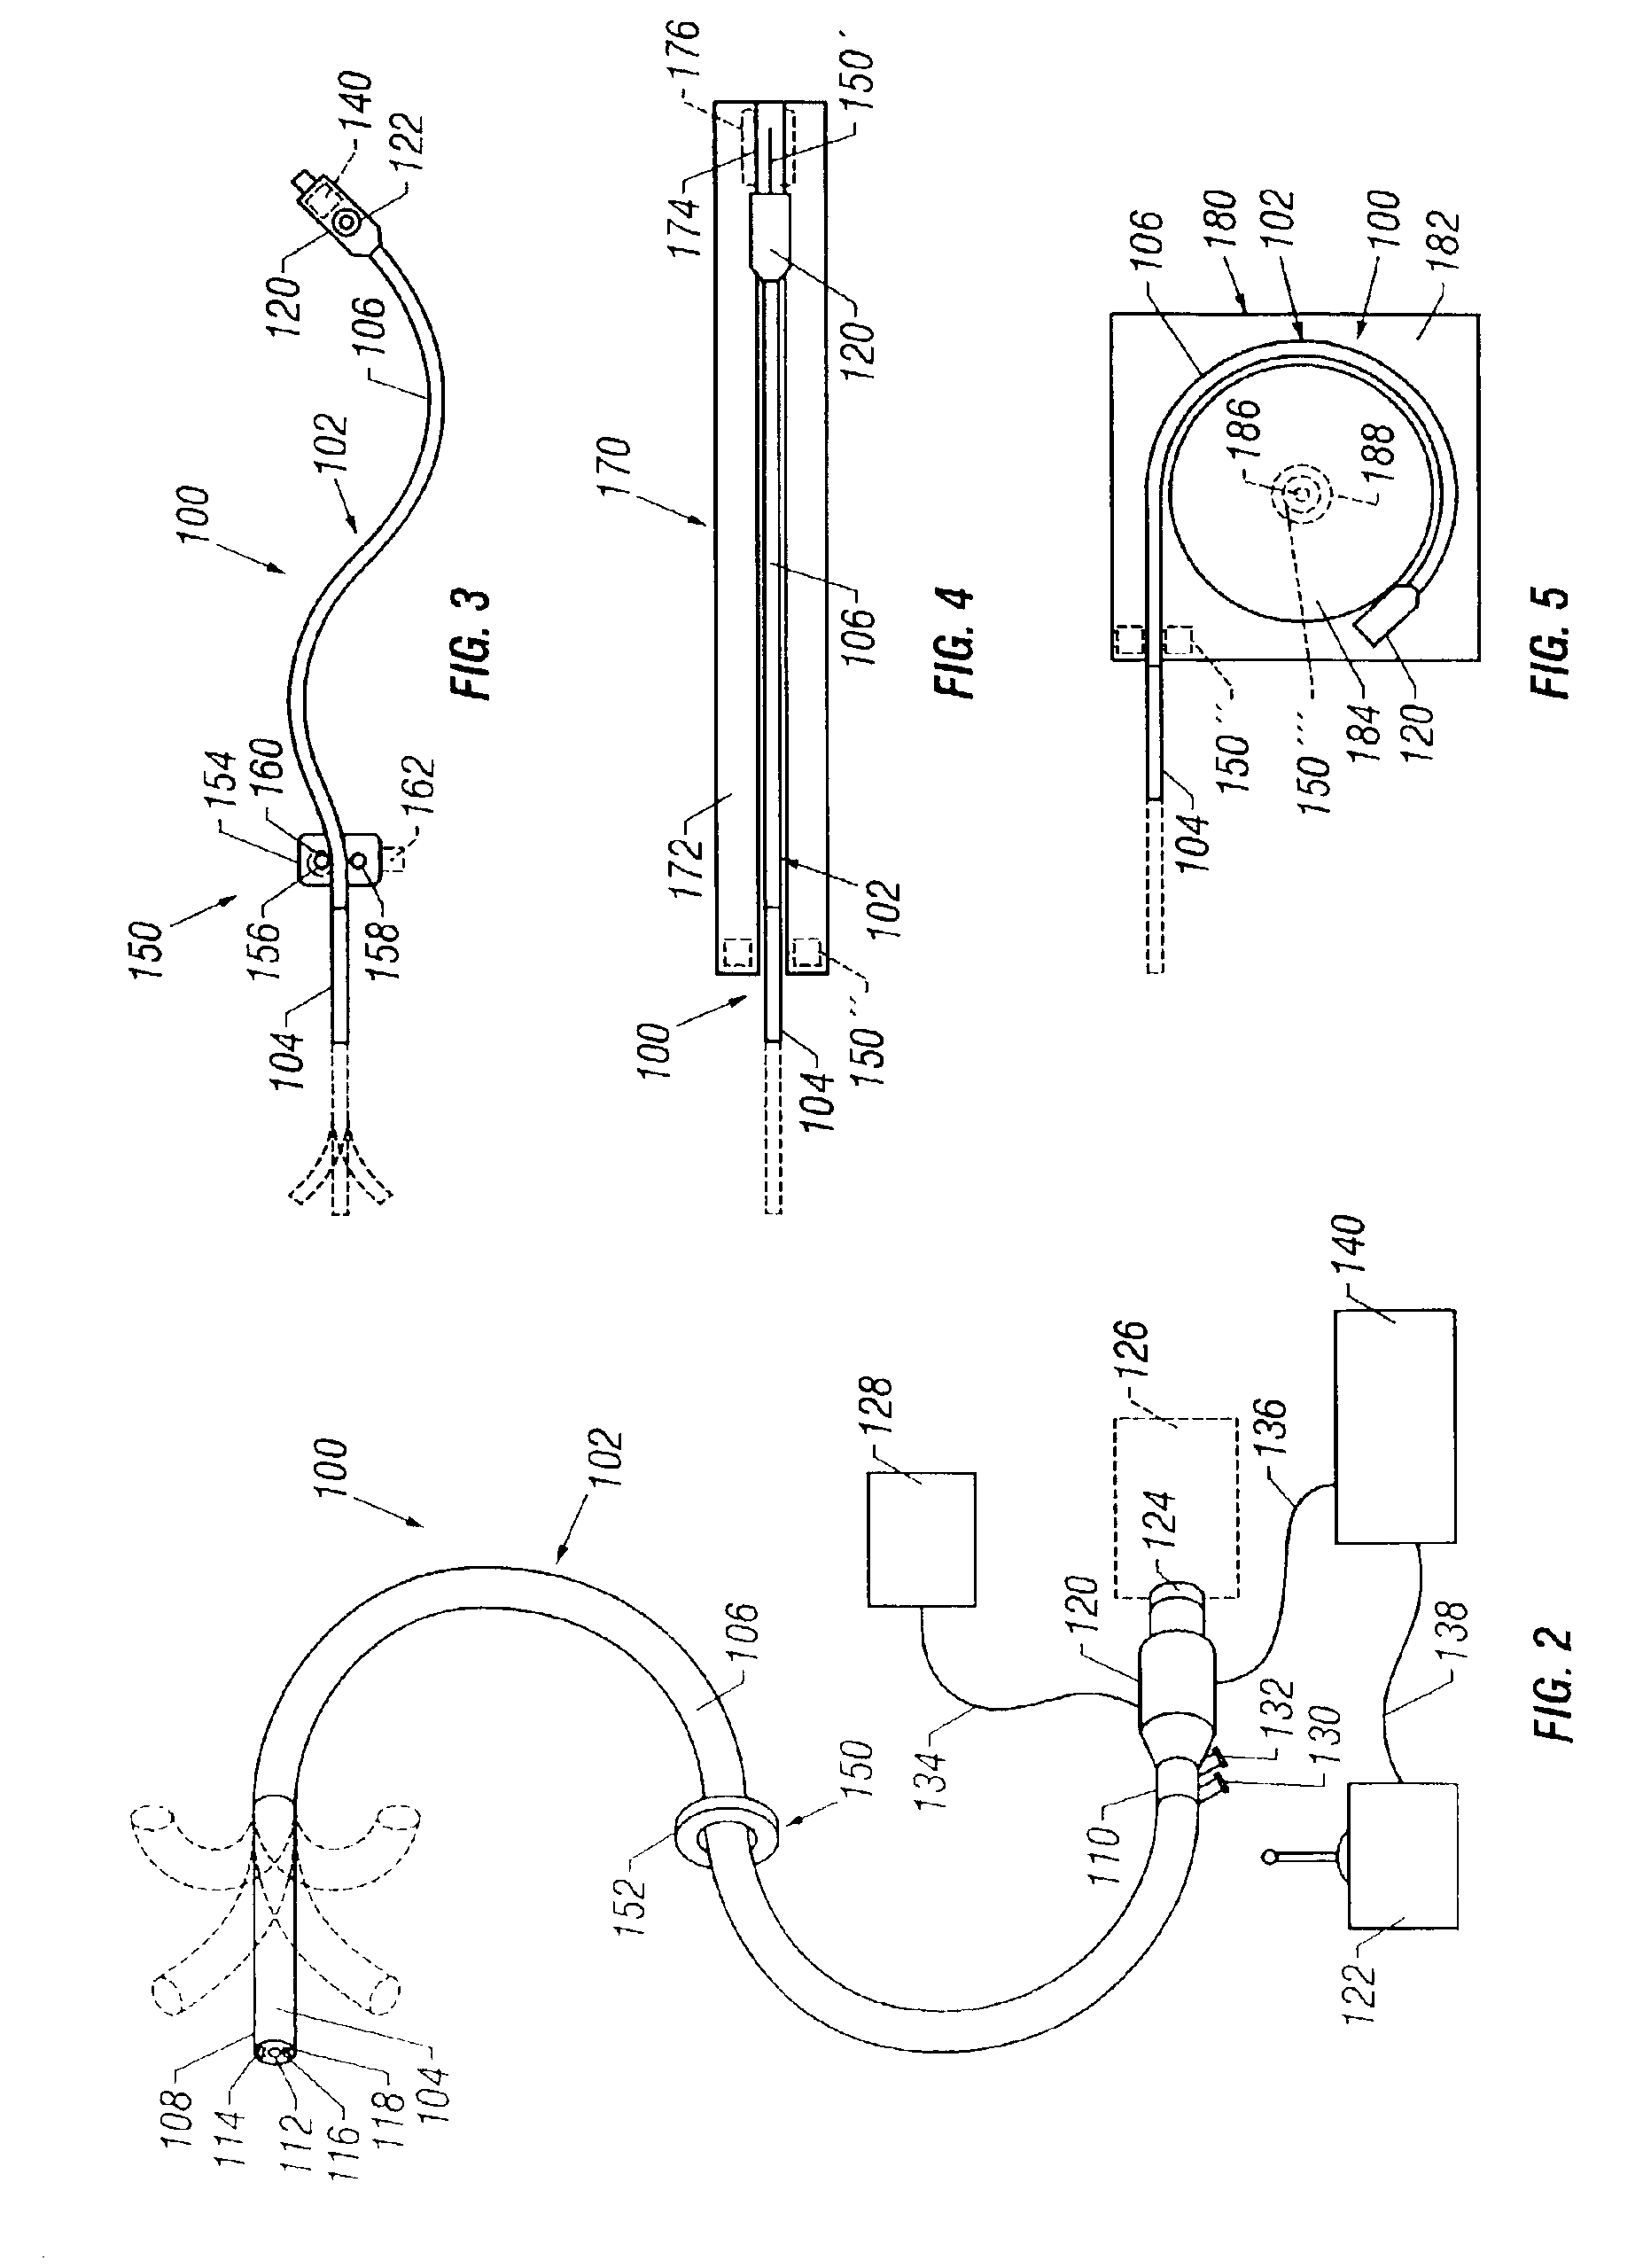 Steerable endoscope and improved method of insertion